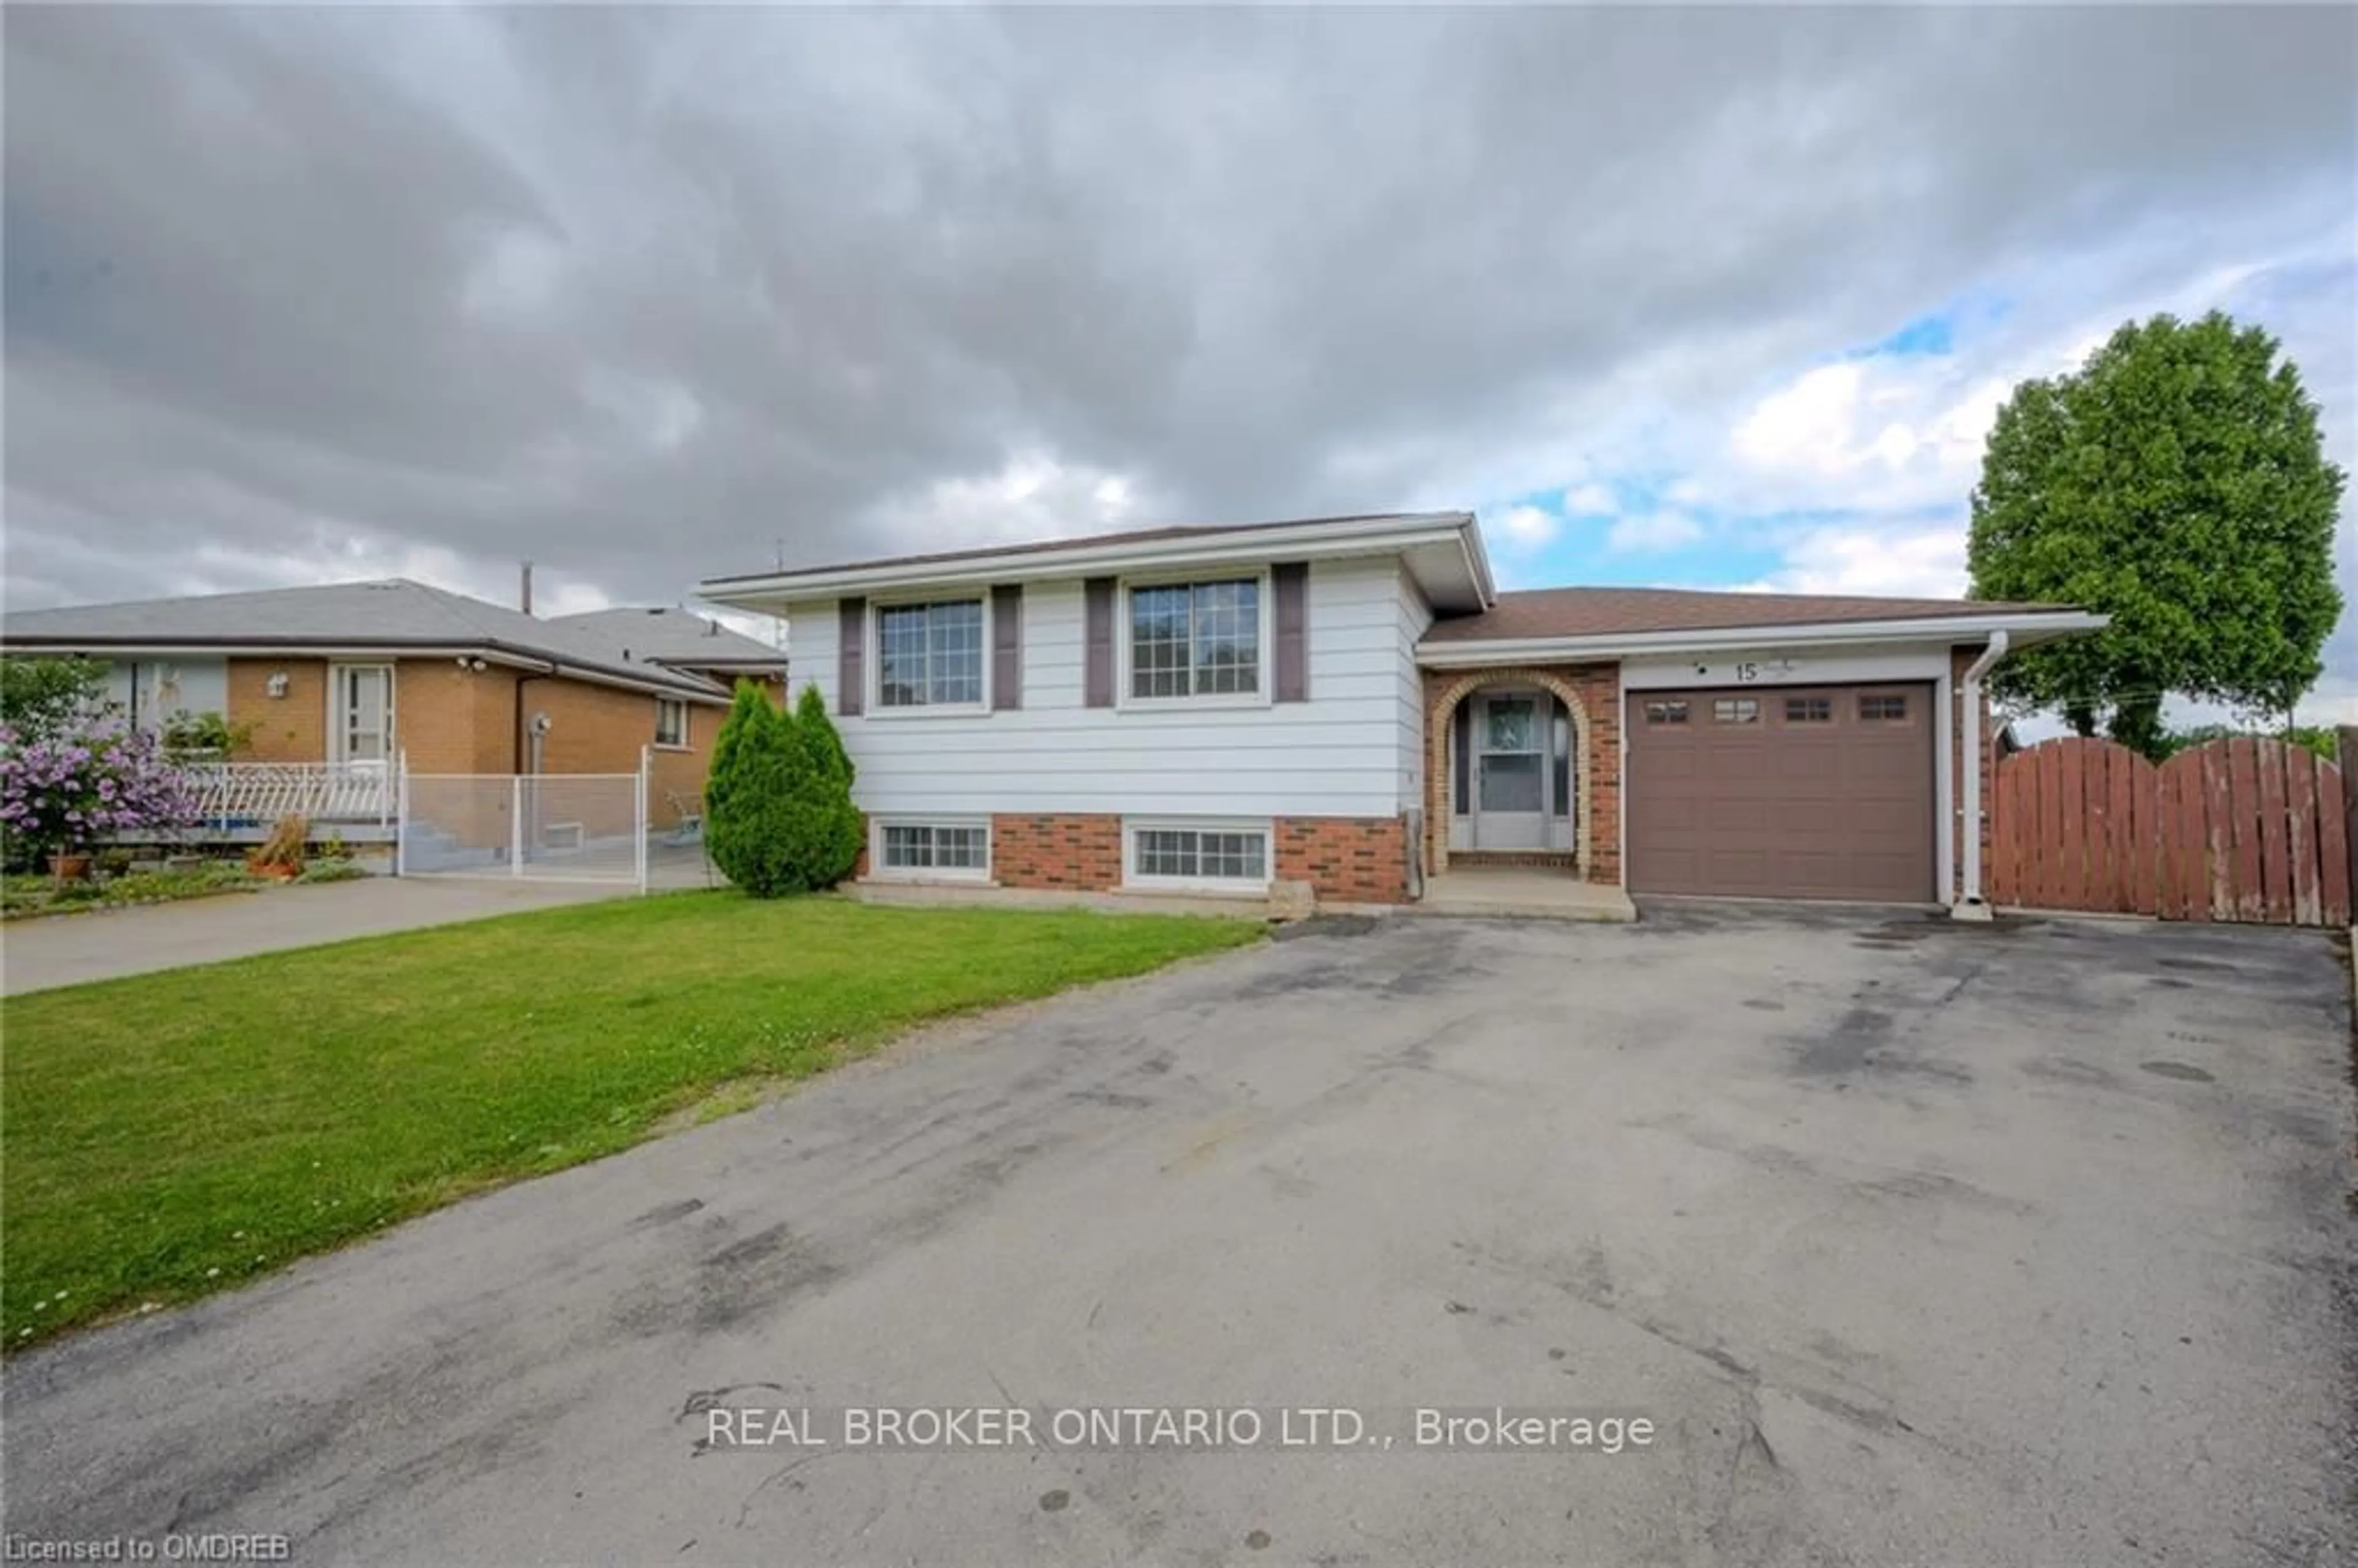 Frontside or backside of a home for 15 Ilford Crt, Hamilton Ontario L8E 1B4